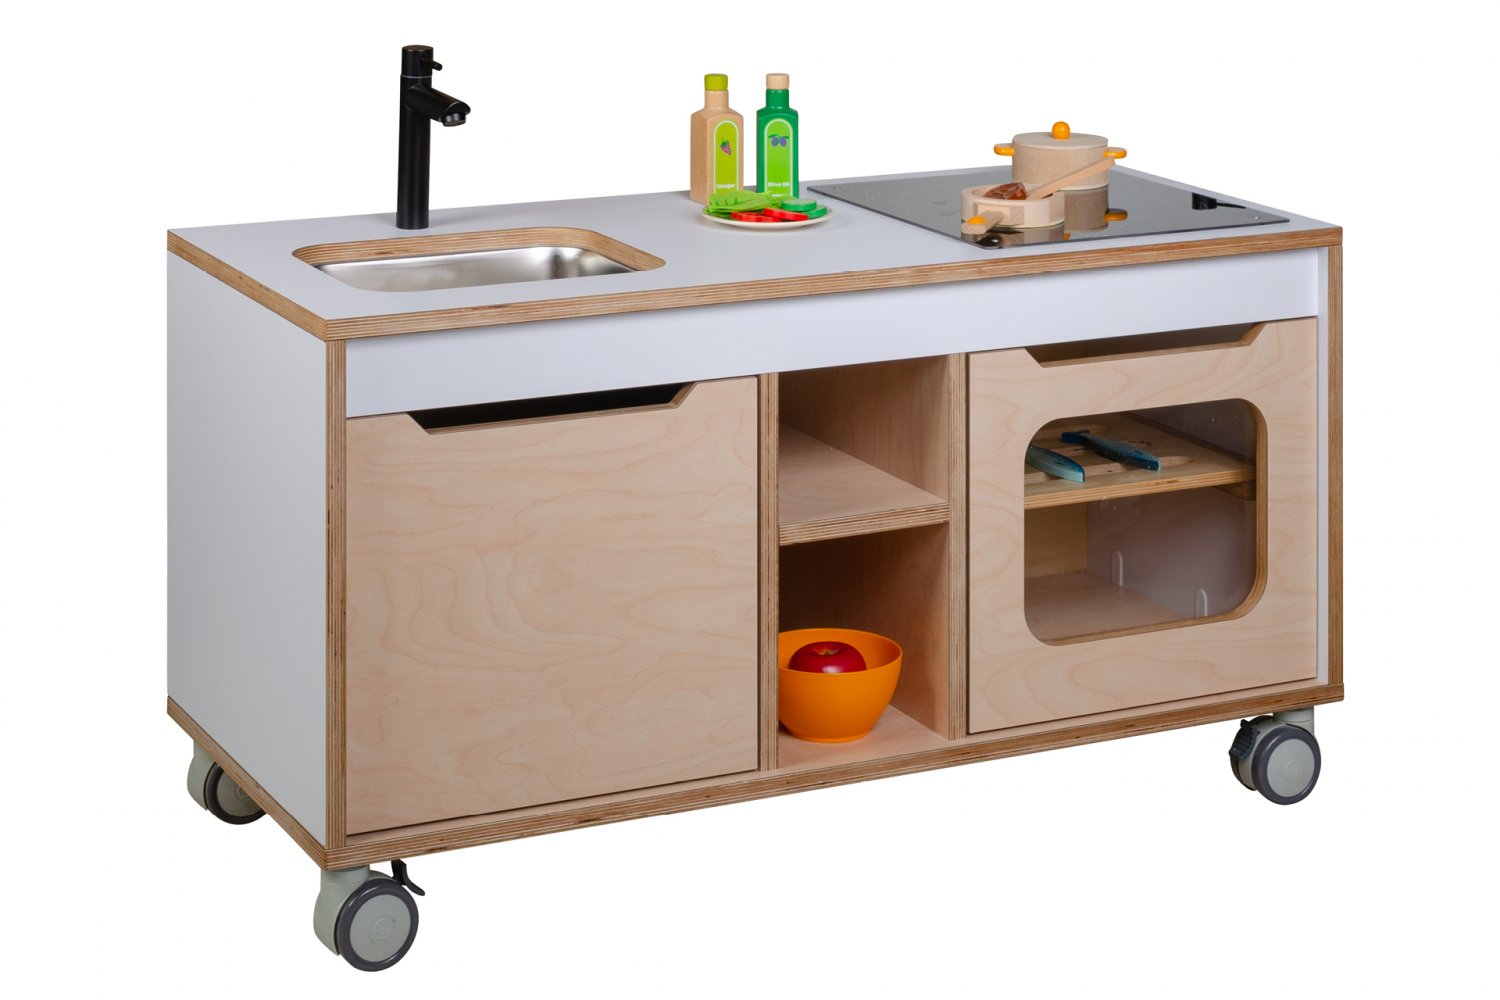 Family role play kitchen 